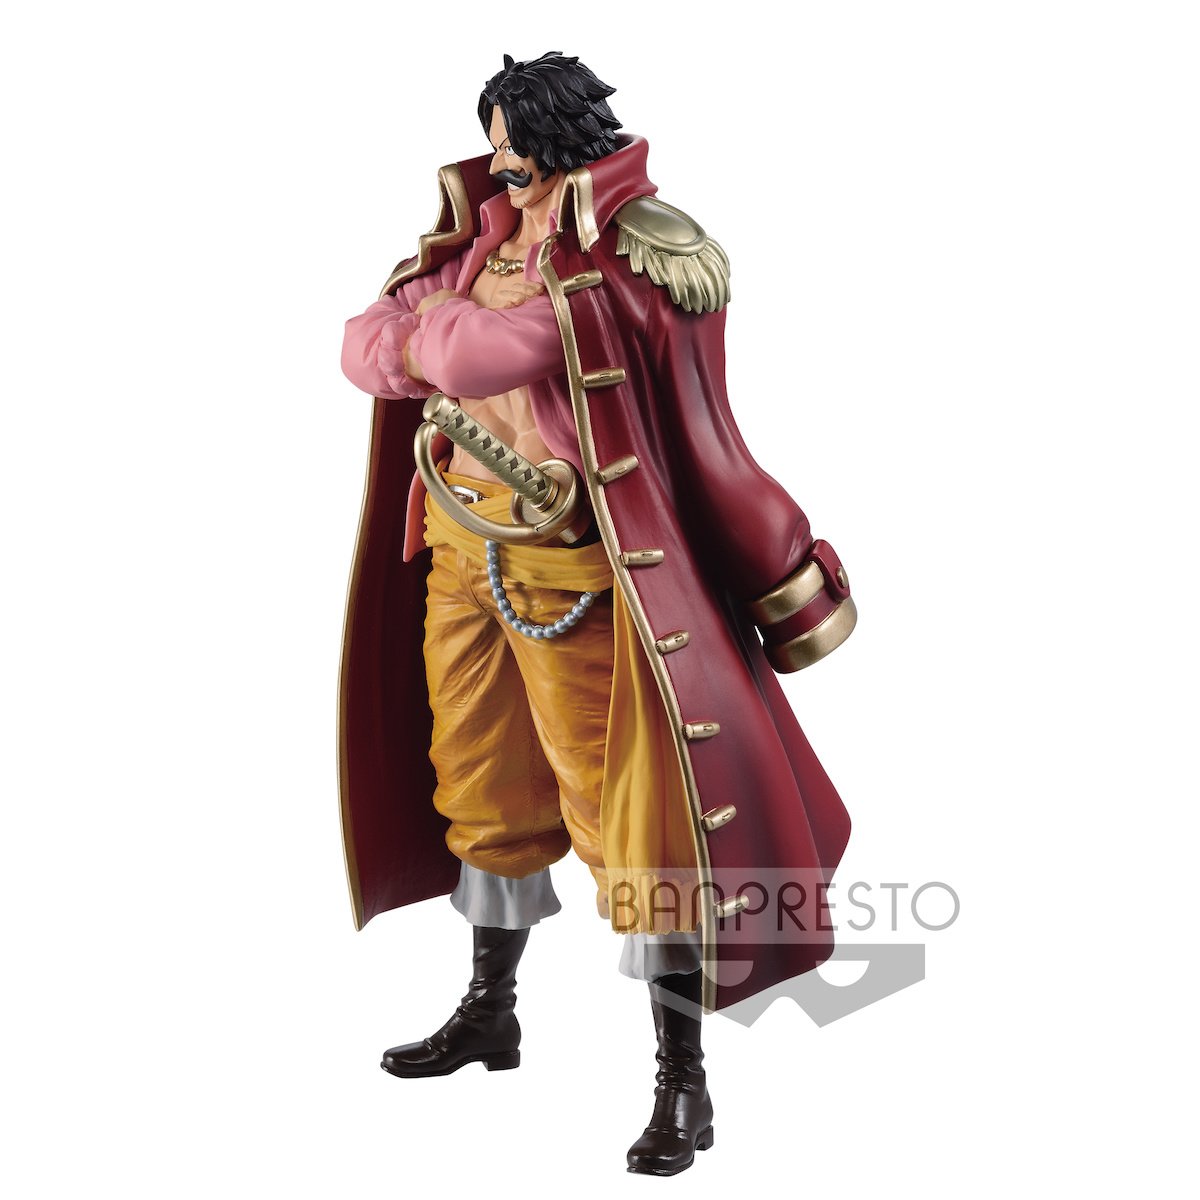 DXF One Piece Wano Country -The Grandline Men- Vol. 12: Gol D. Roger